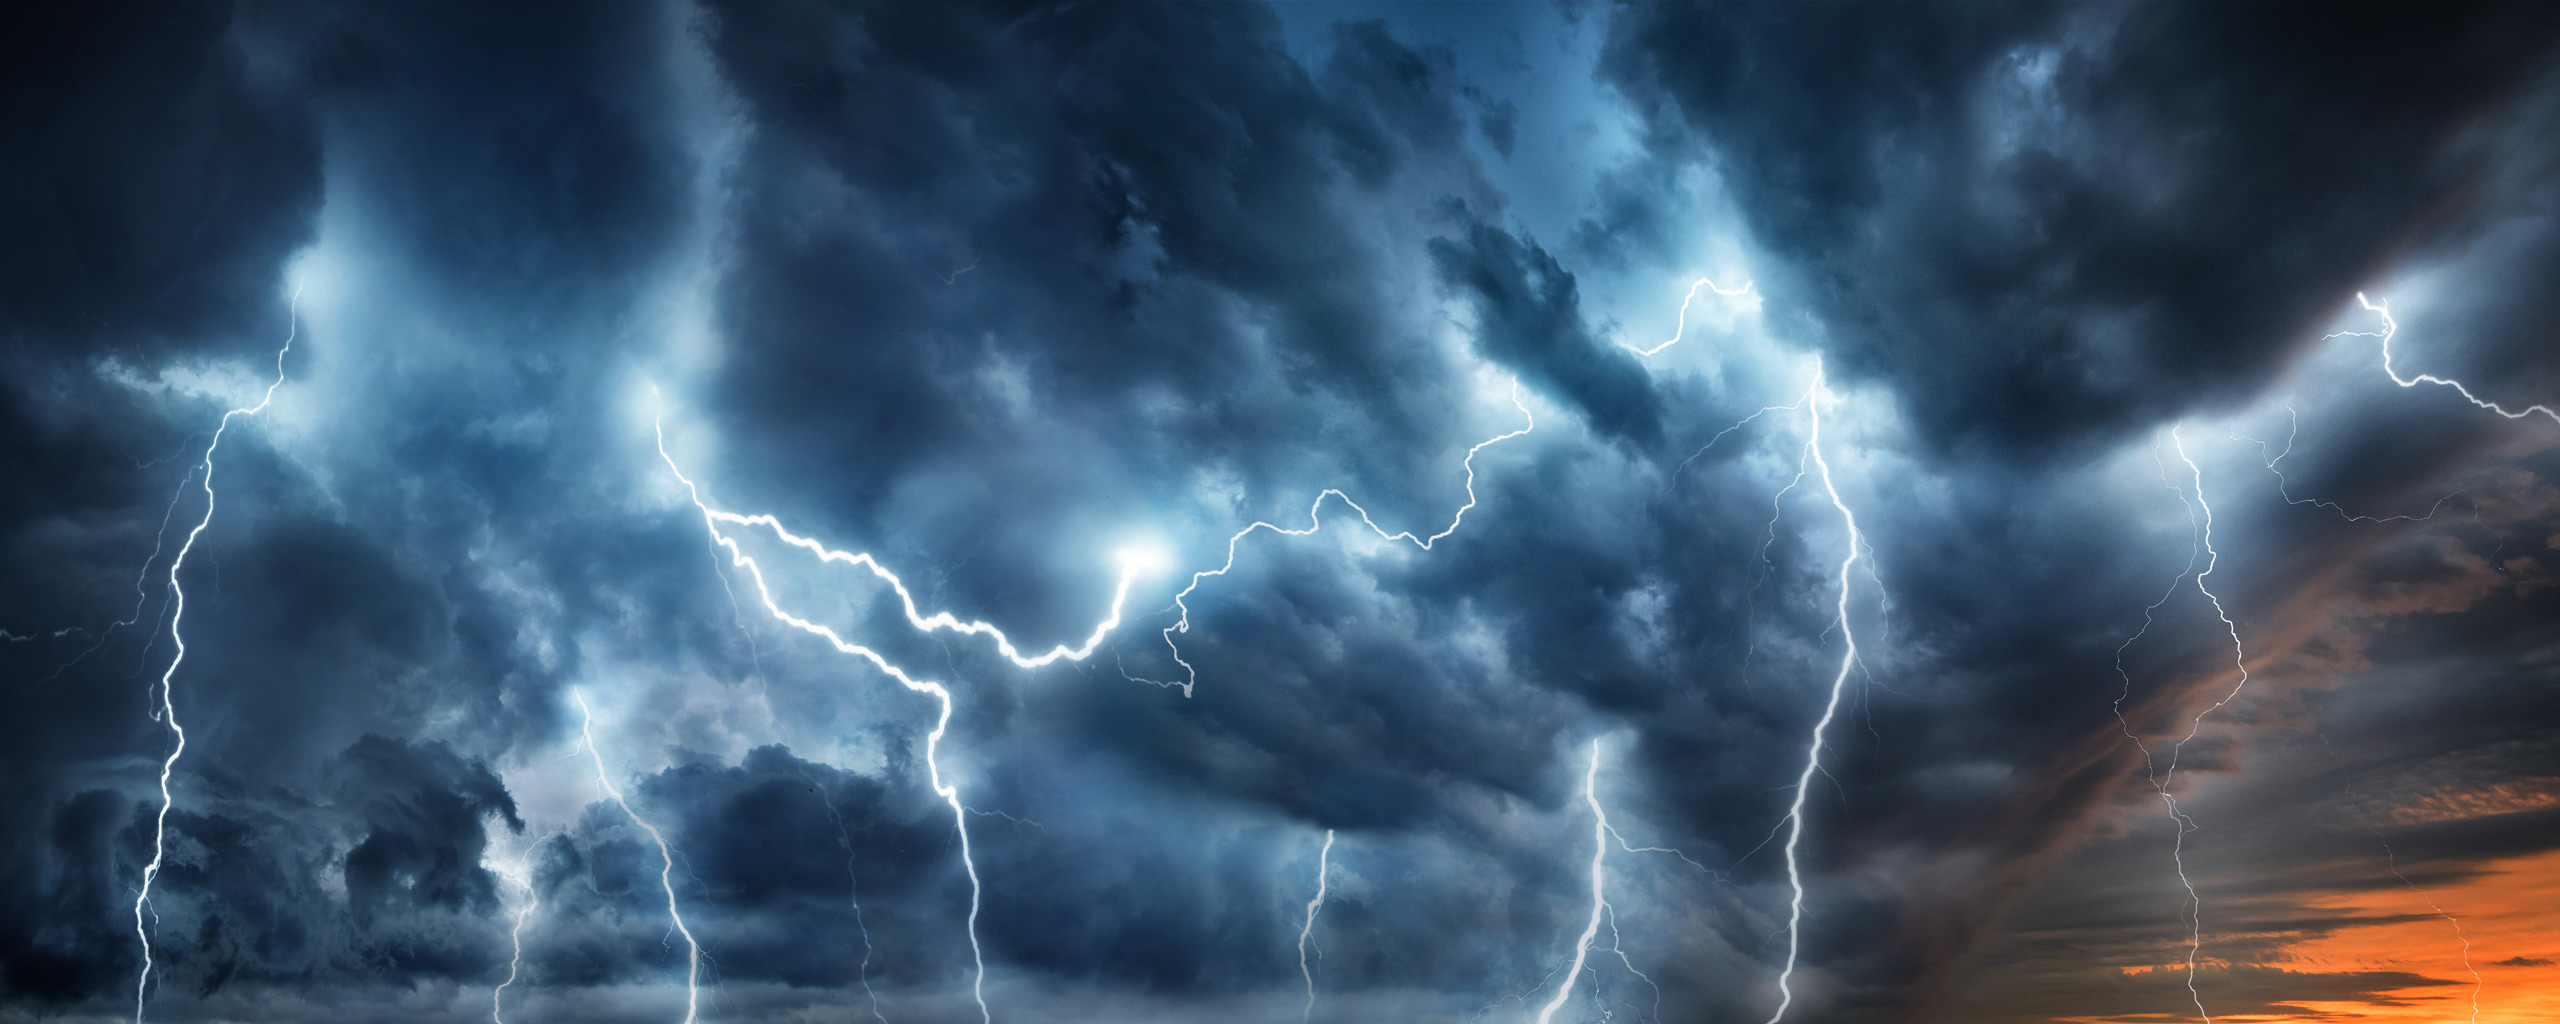 Blue lightning Wallpapers Download | MobCup